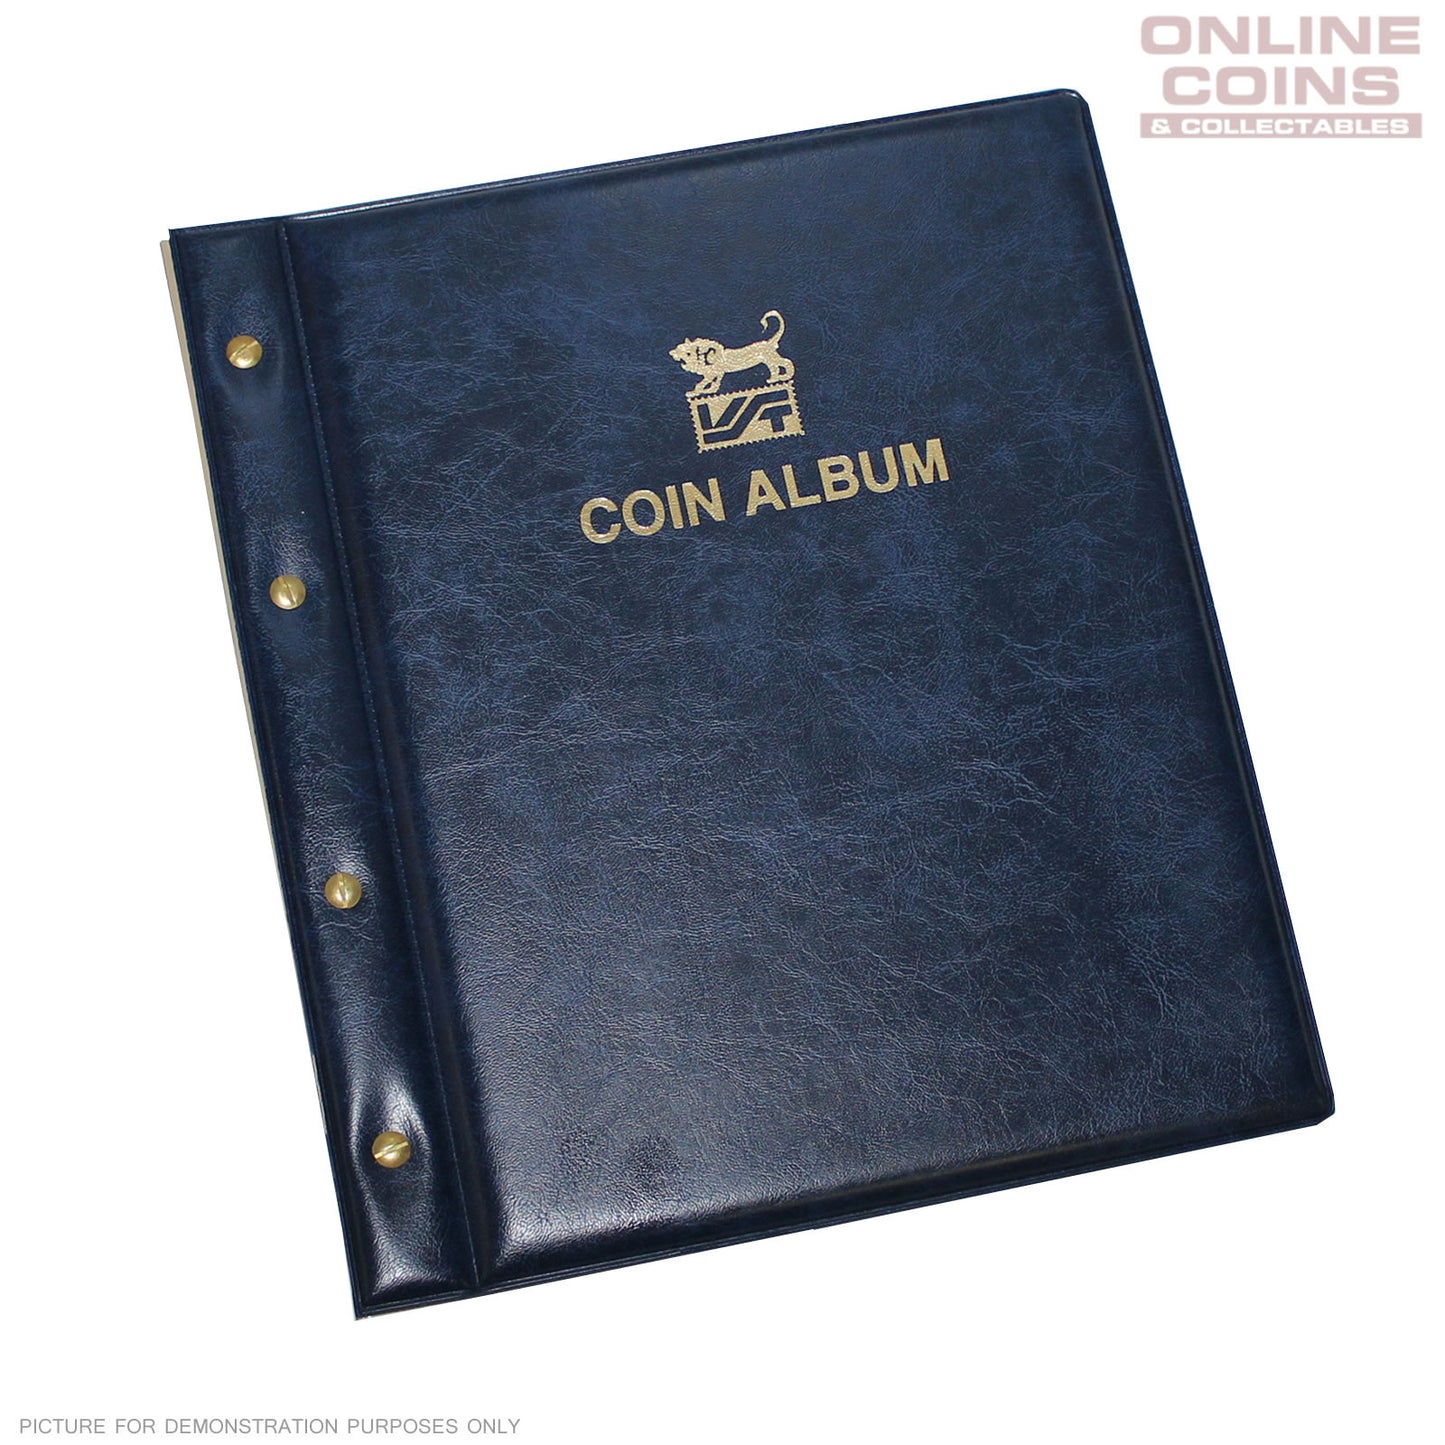 VST Coin Album Padded leatherette Cover Including 6 Coin Album Pages - BLUE